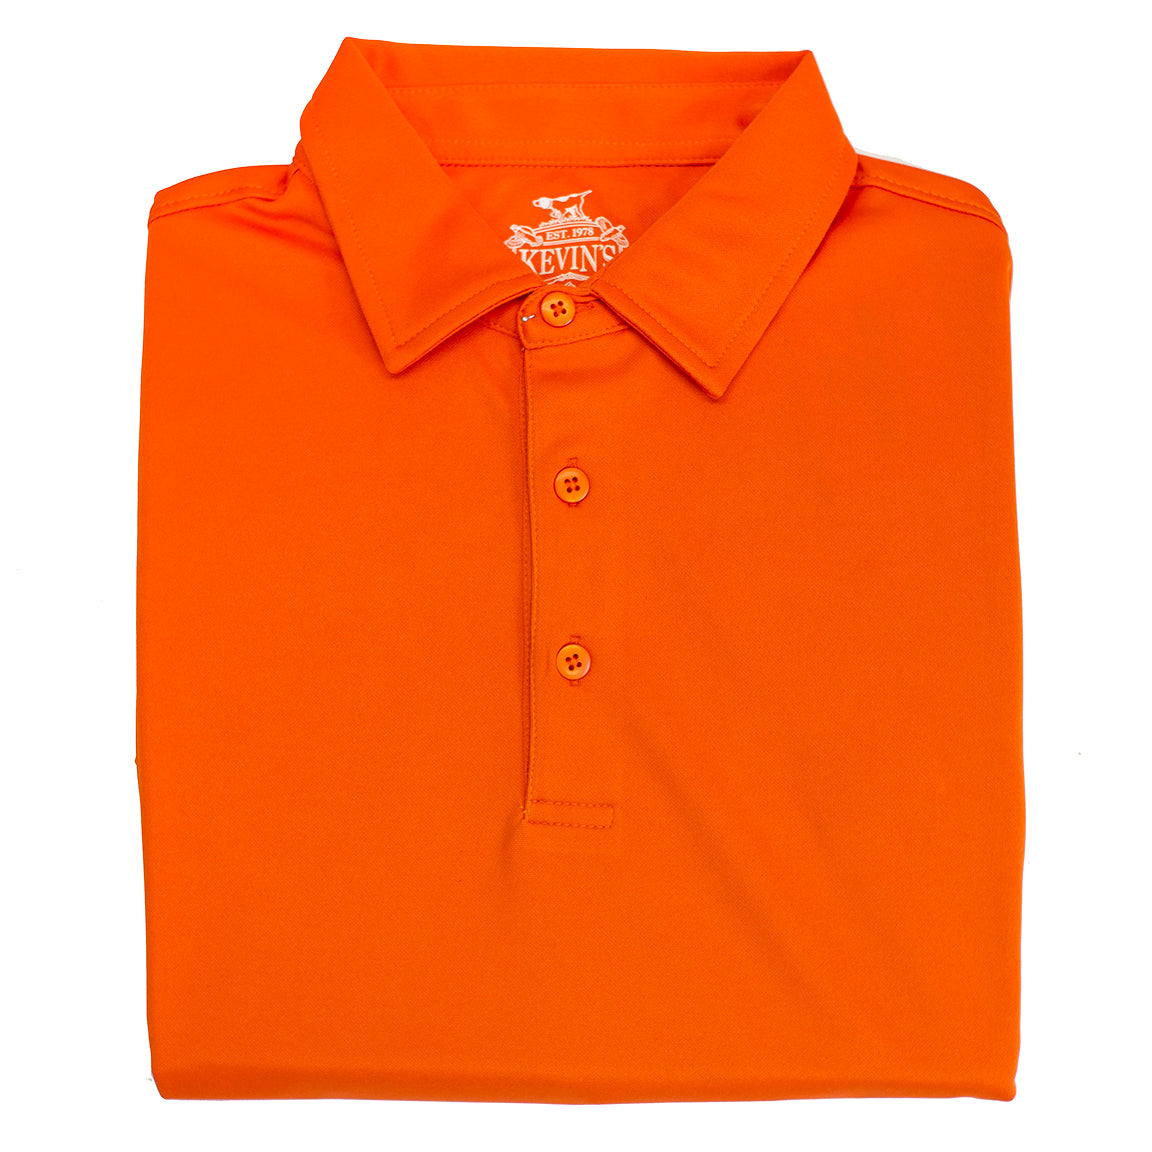 Kevin's Stretch Performance Polo-MENS CLOTHING-Orange-M-Kevin's Fine Outdoor Gear & Apparel